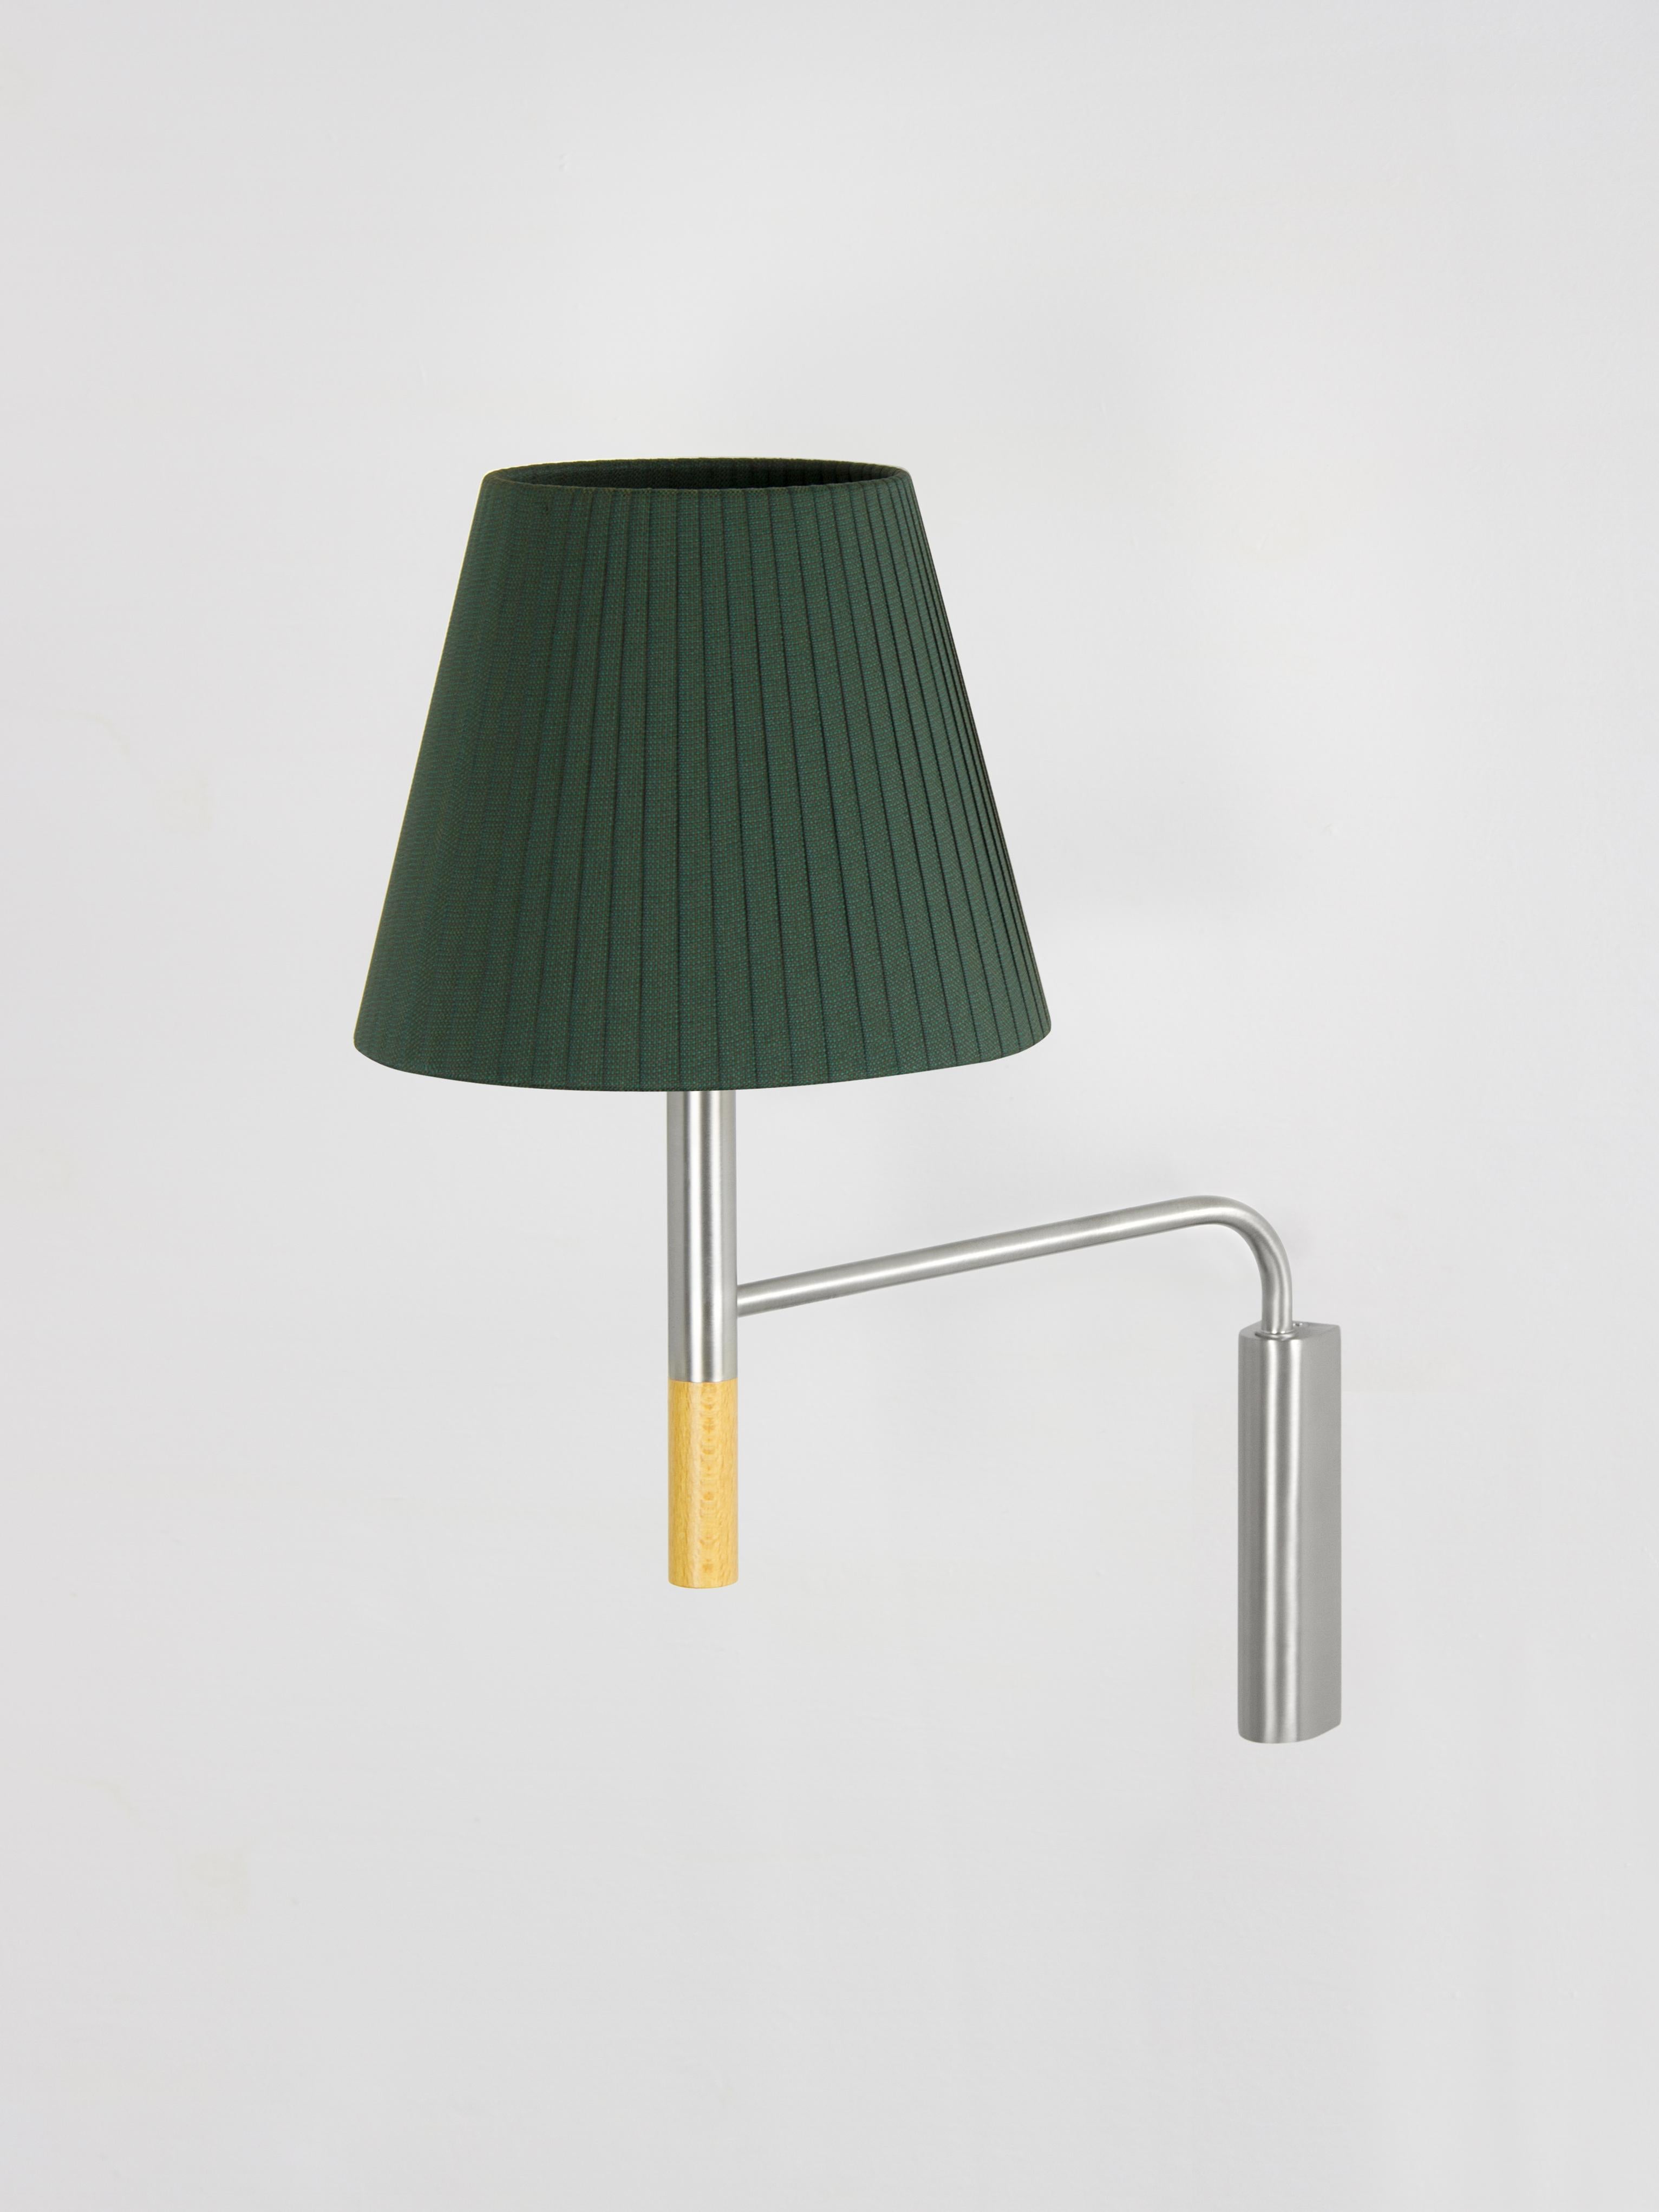 Green BC3 wall lamp by Santa & Cole
Dimensions: D 20 x W 37 x H 41 cm
Materials: Metal, beech wood, ribbon.

The BC1, BC2 and BC3 wall lamps are the epitome of sturdy construction, aesthetic sobriety and functional quality. Their various shade